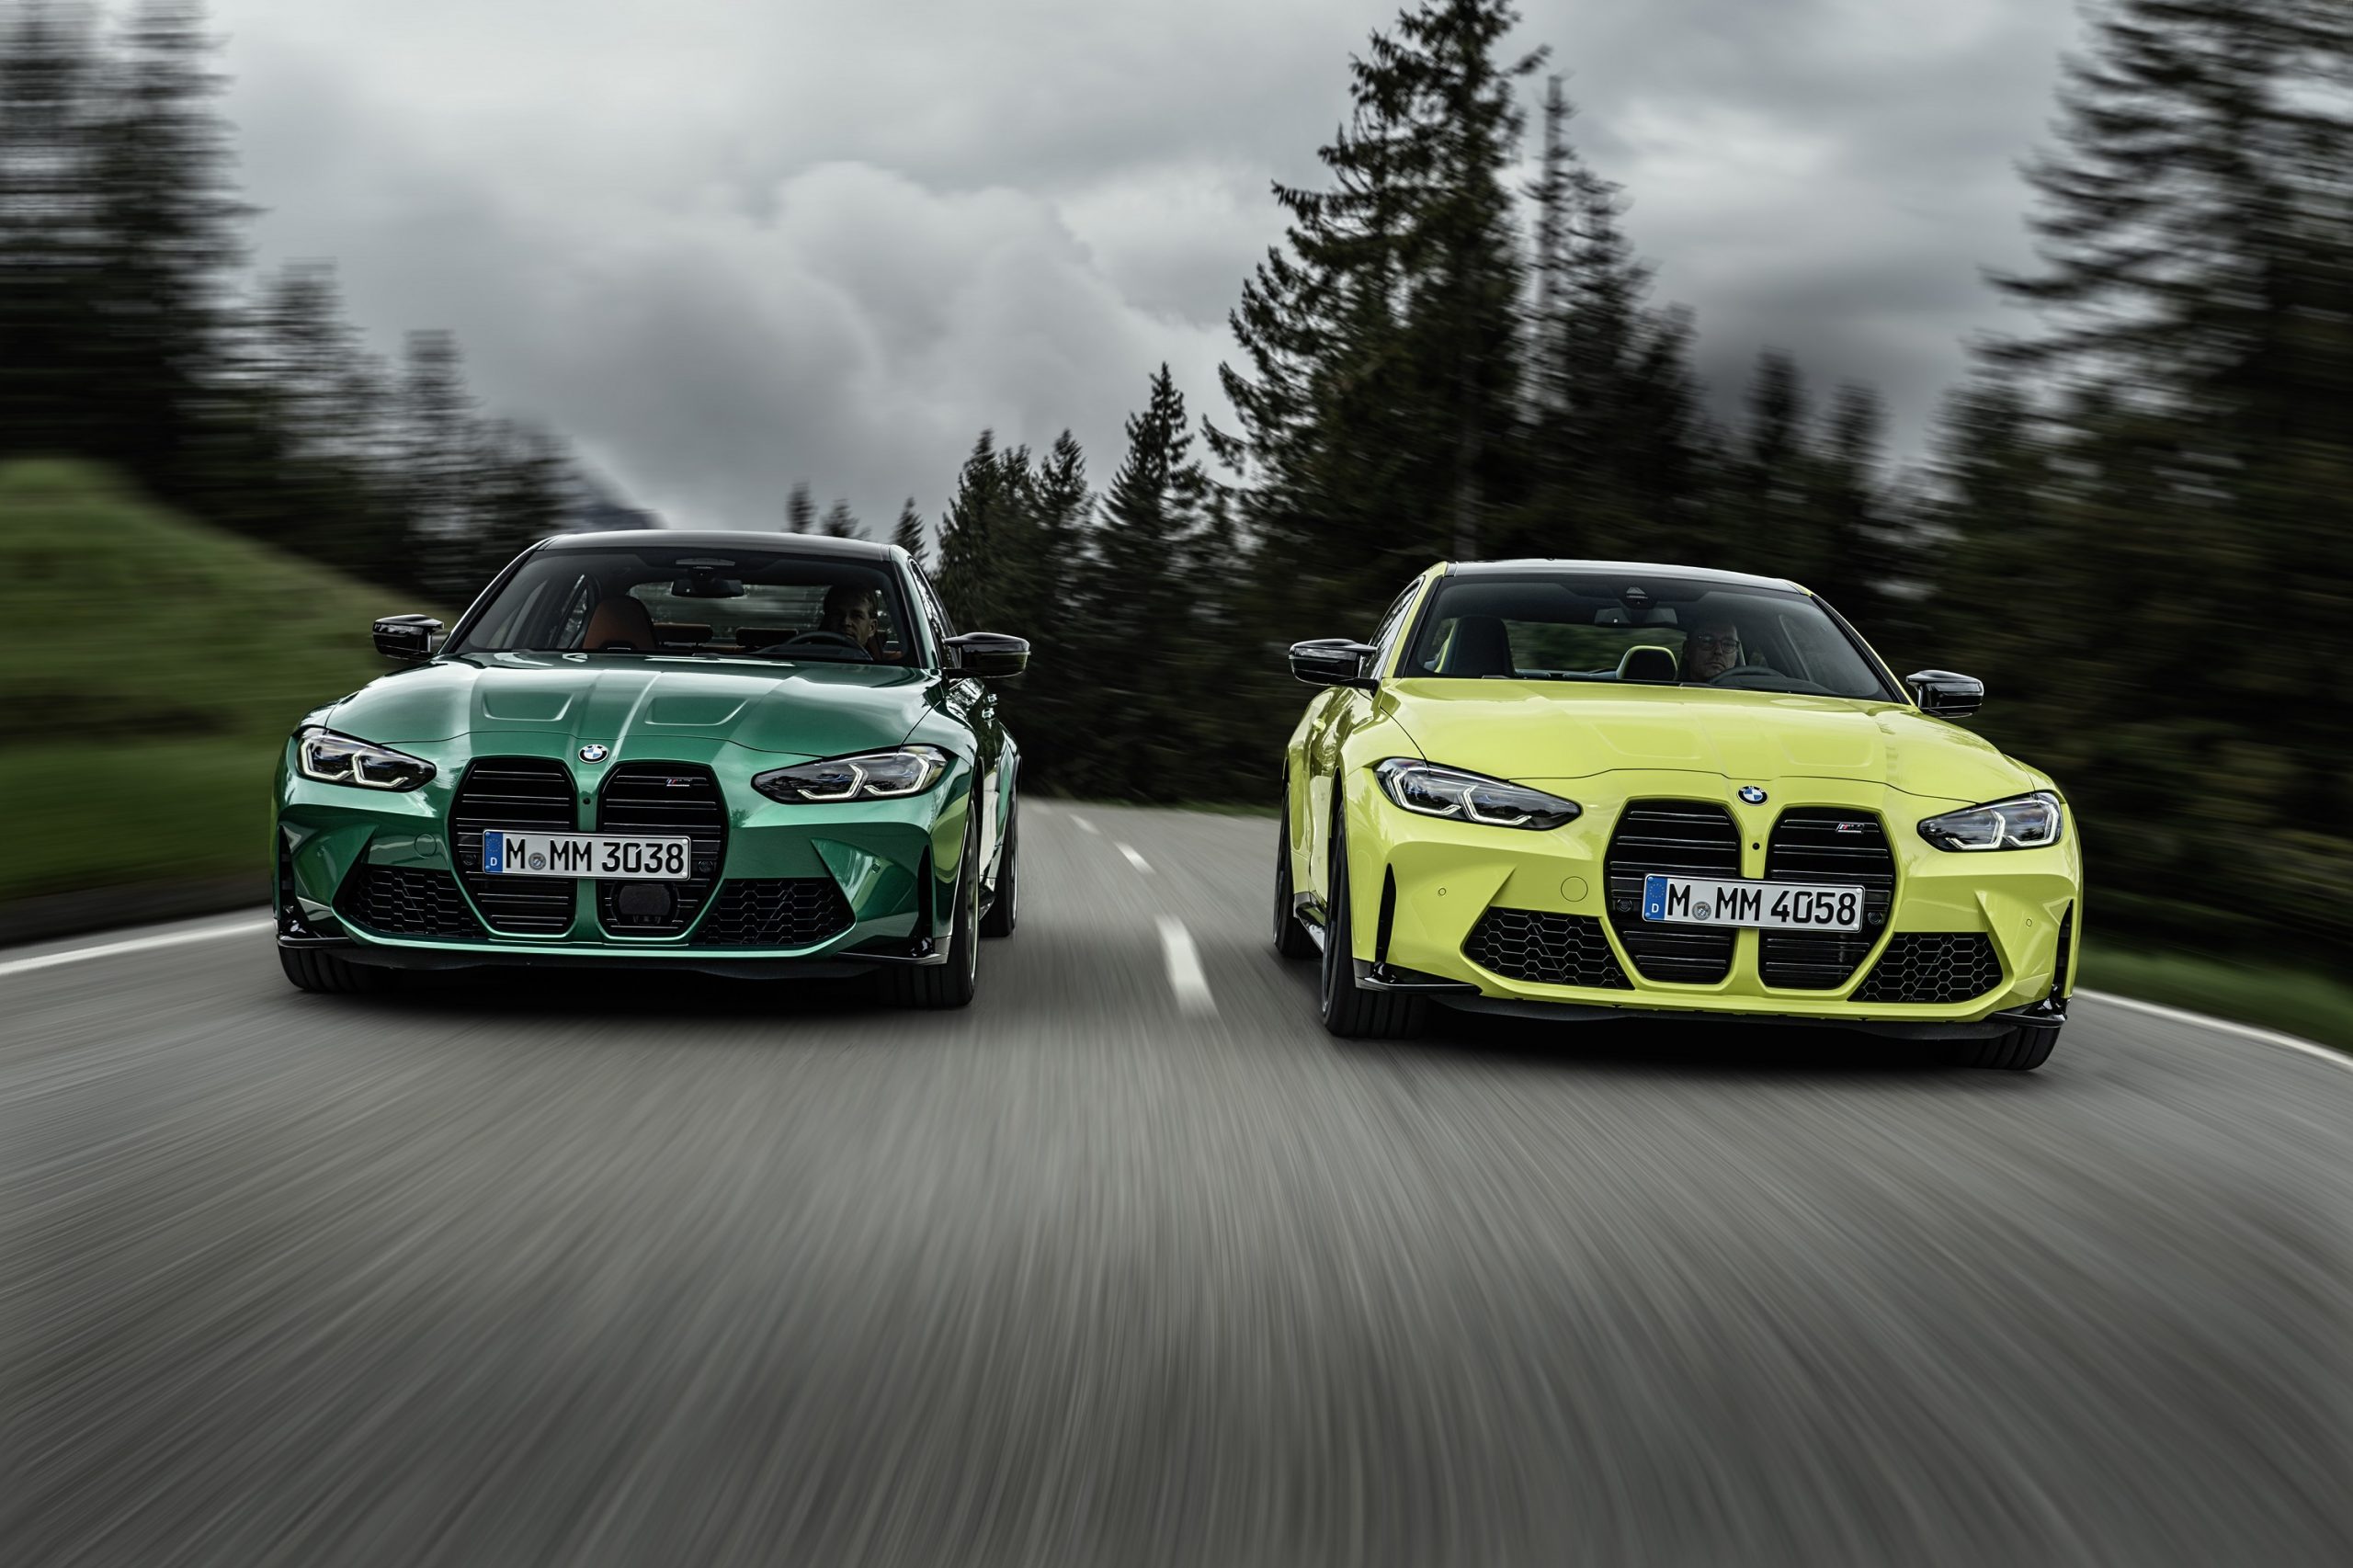 A BMW M4 and M3 side by side on a German back road